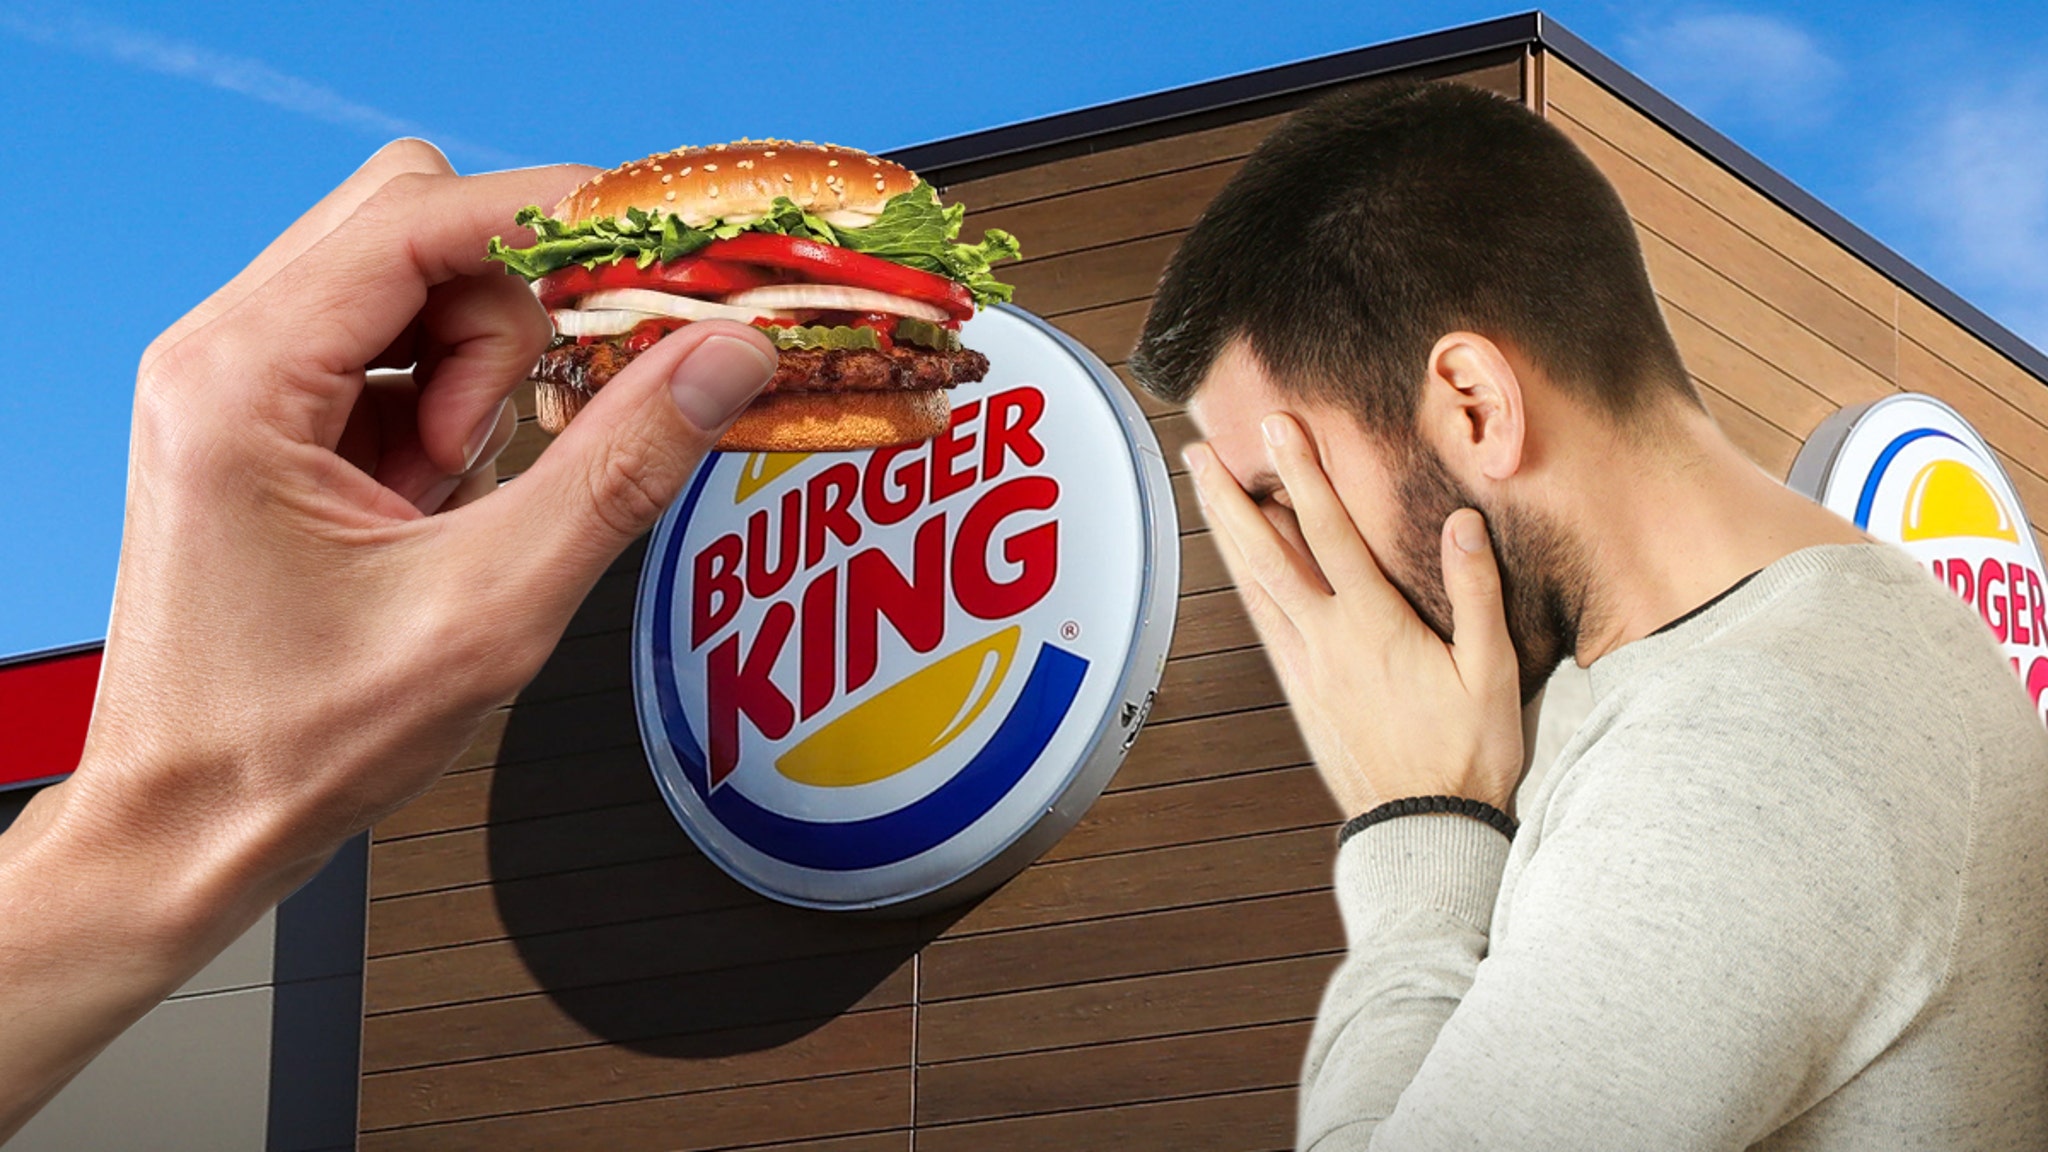 Burger King's Whopper Size lawsuit allowed to continue, judge rules